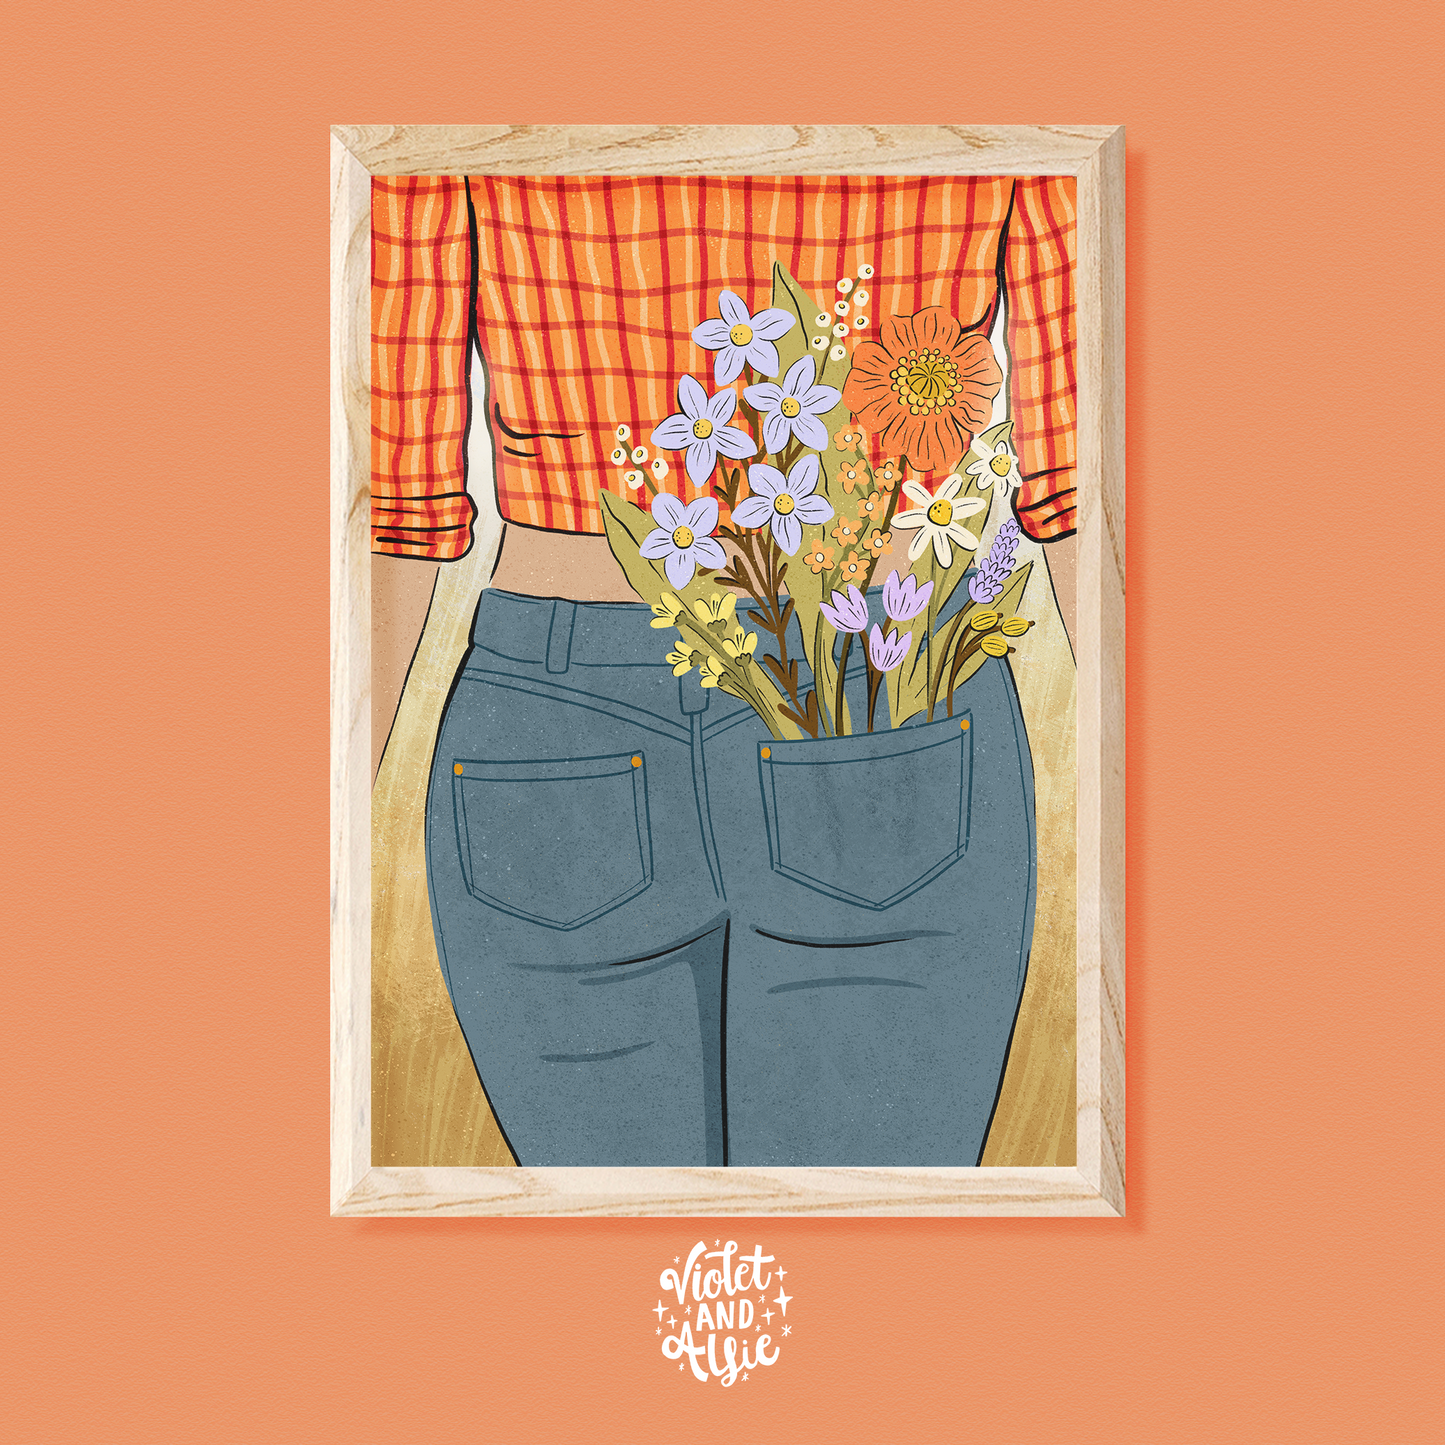 This pretty cowgirl flower print comes in orange or pink colour options and makes a perfect addition to any boho western home decor. country and western, cowboy aesthetic, flower illustration, modern cowgirl, jeans check shirt, boho cowgirl, boho western print, cowboy shirt art, cowgirl illustration